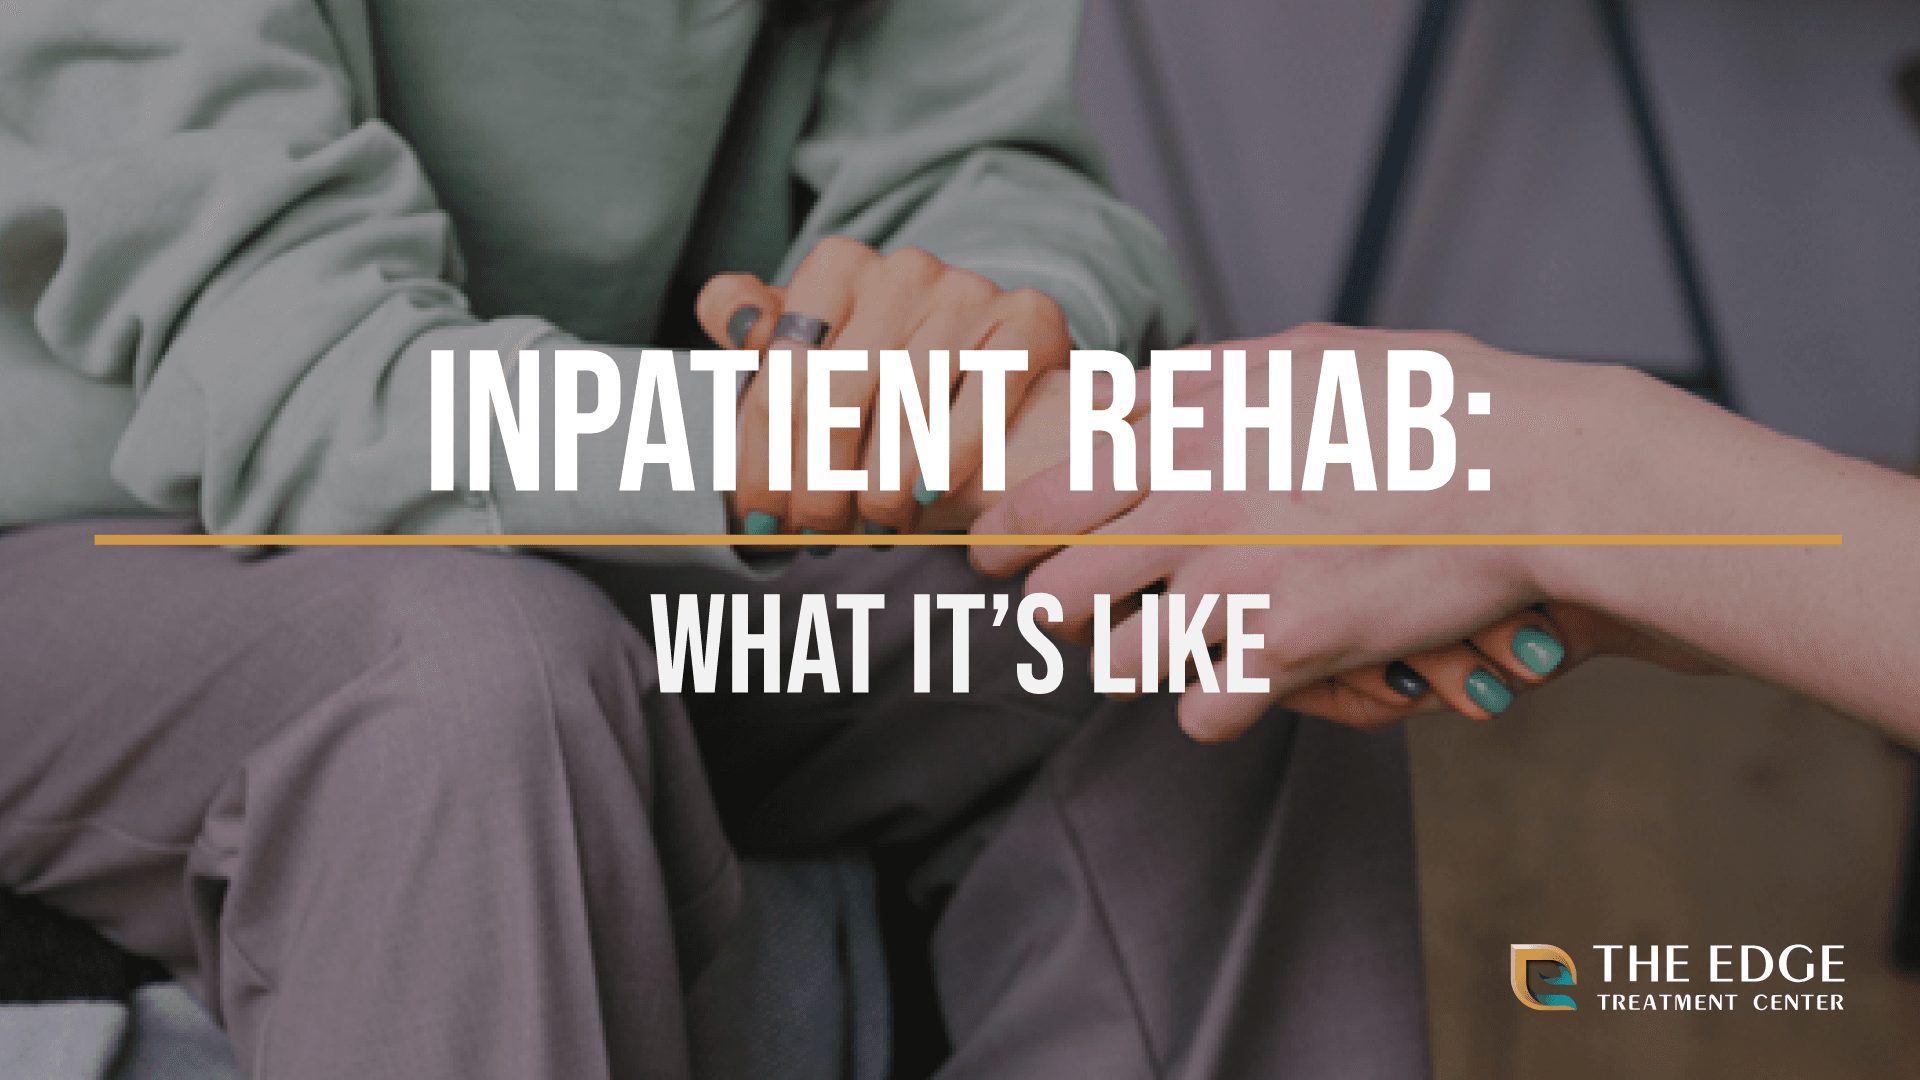 What is Inpatient Rehab Like?